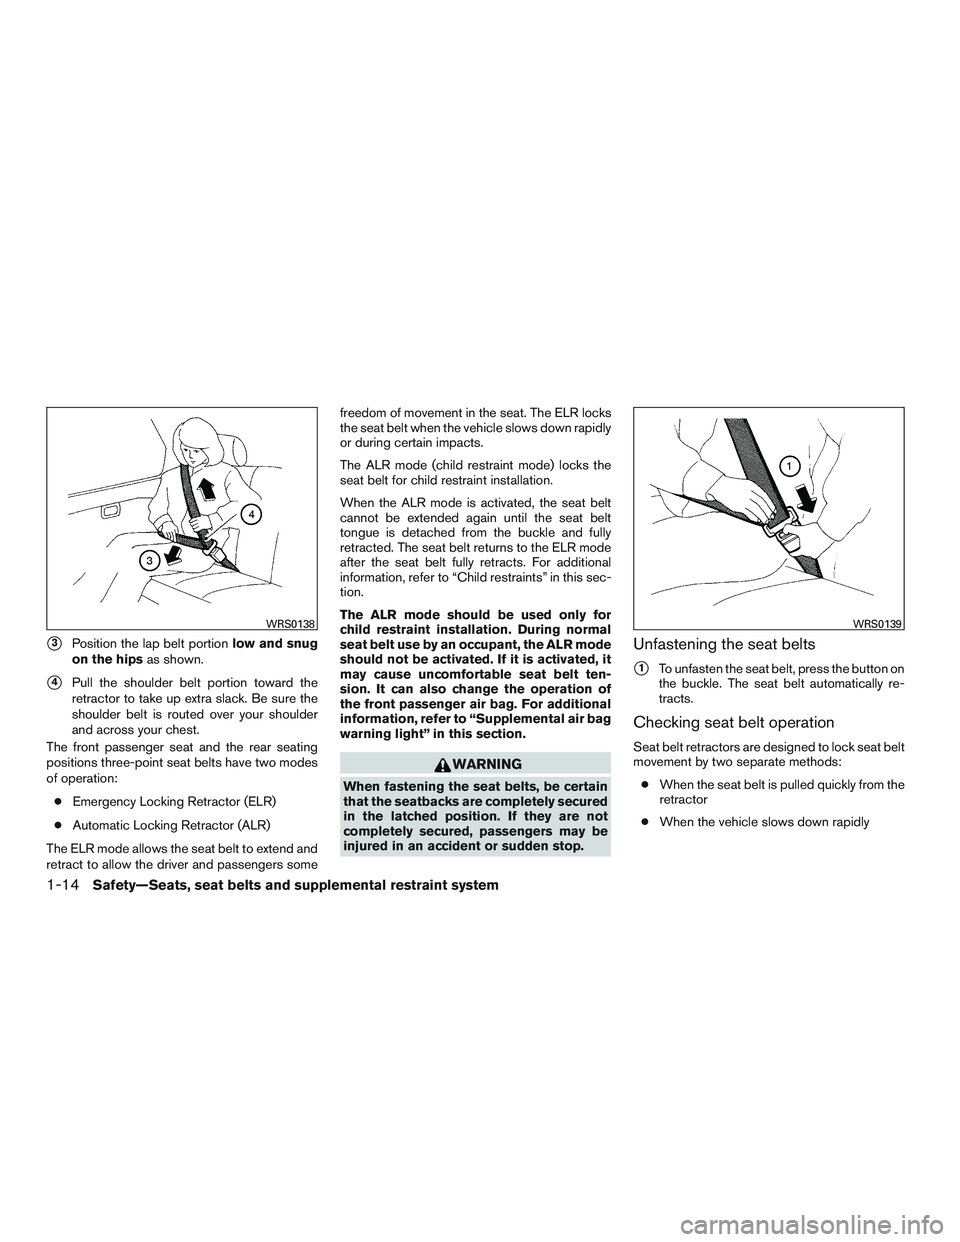 NISSAN MICRA 2012  Owners Manual 3Position the lap belt portionlow and snug
on the hips as shown.
4Pull the shoulder belt portion toward the
retractor to take up extra slack. Be sure the
shoulder belt is routed over your shoulder
a